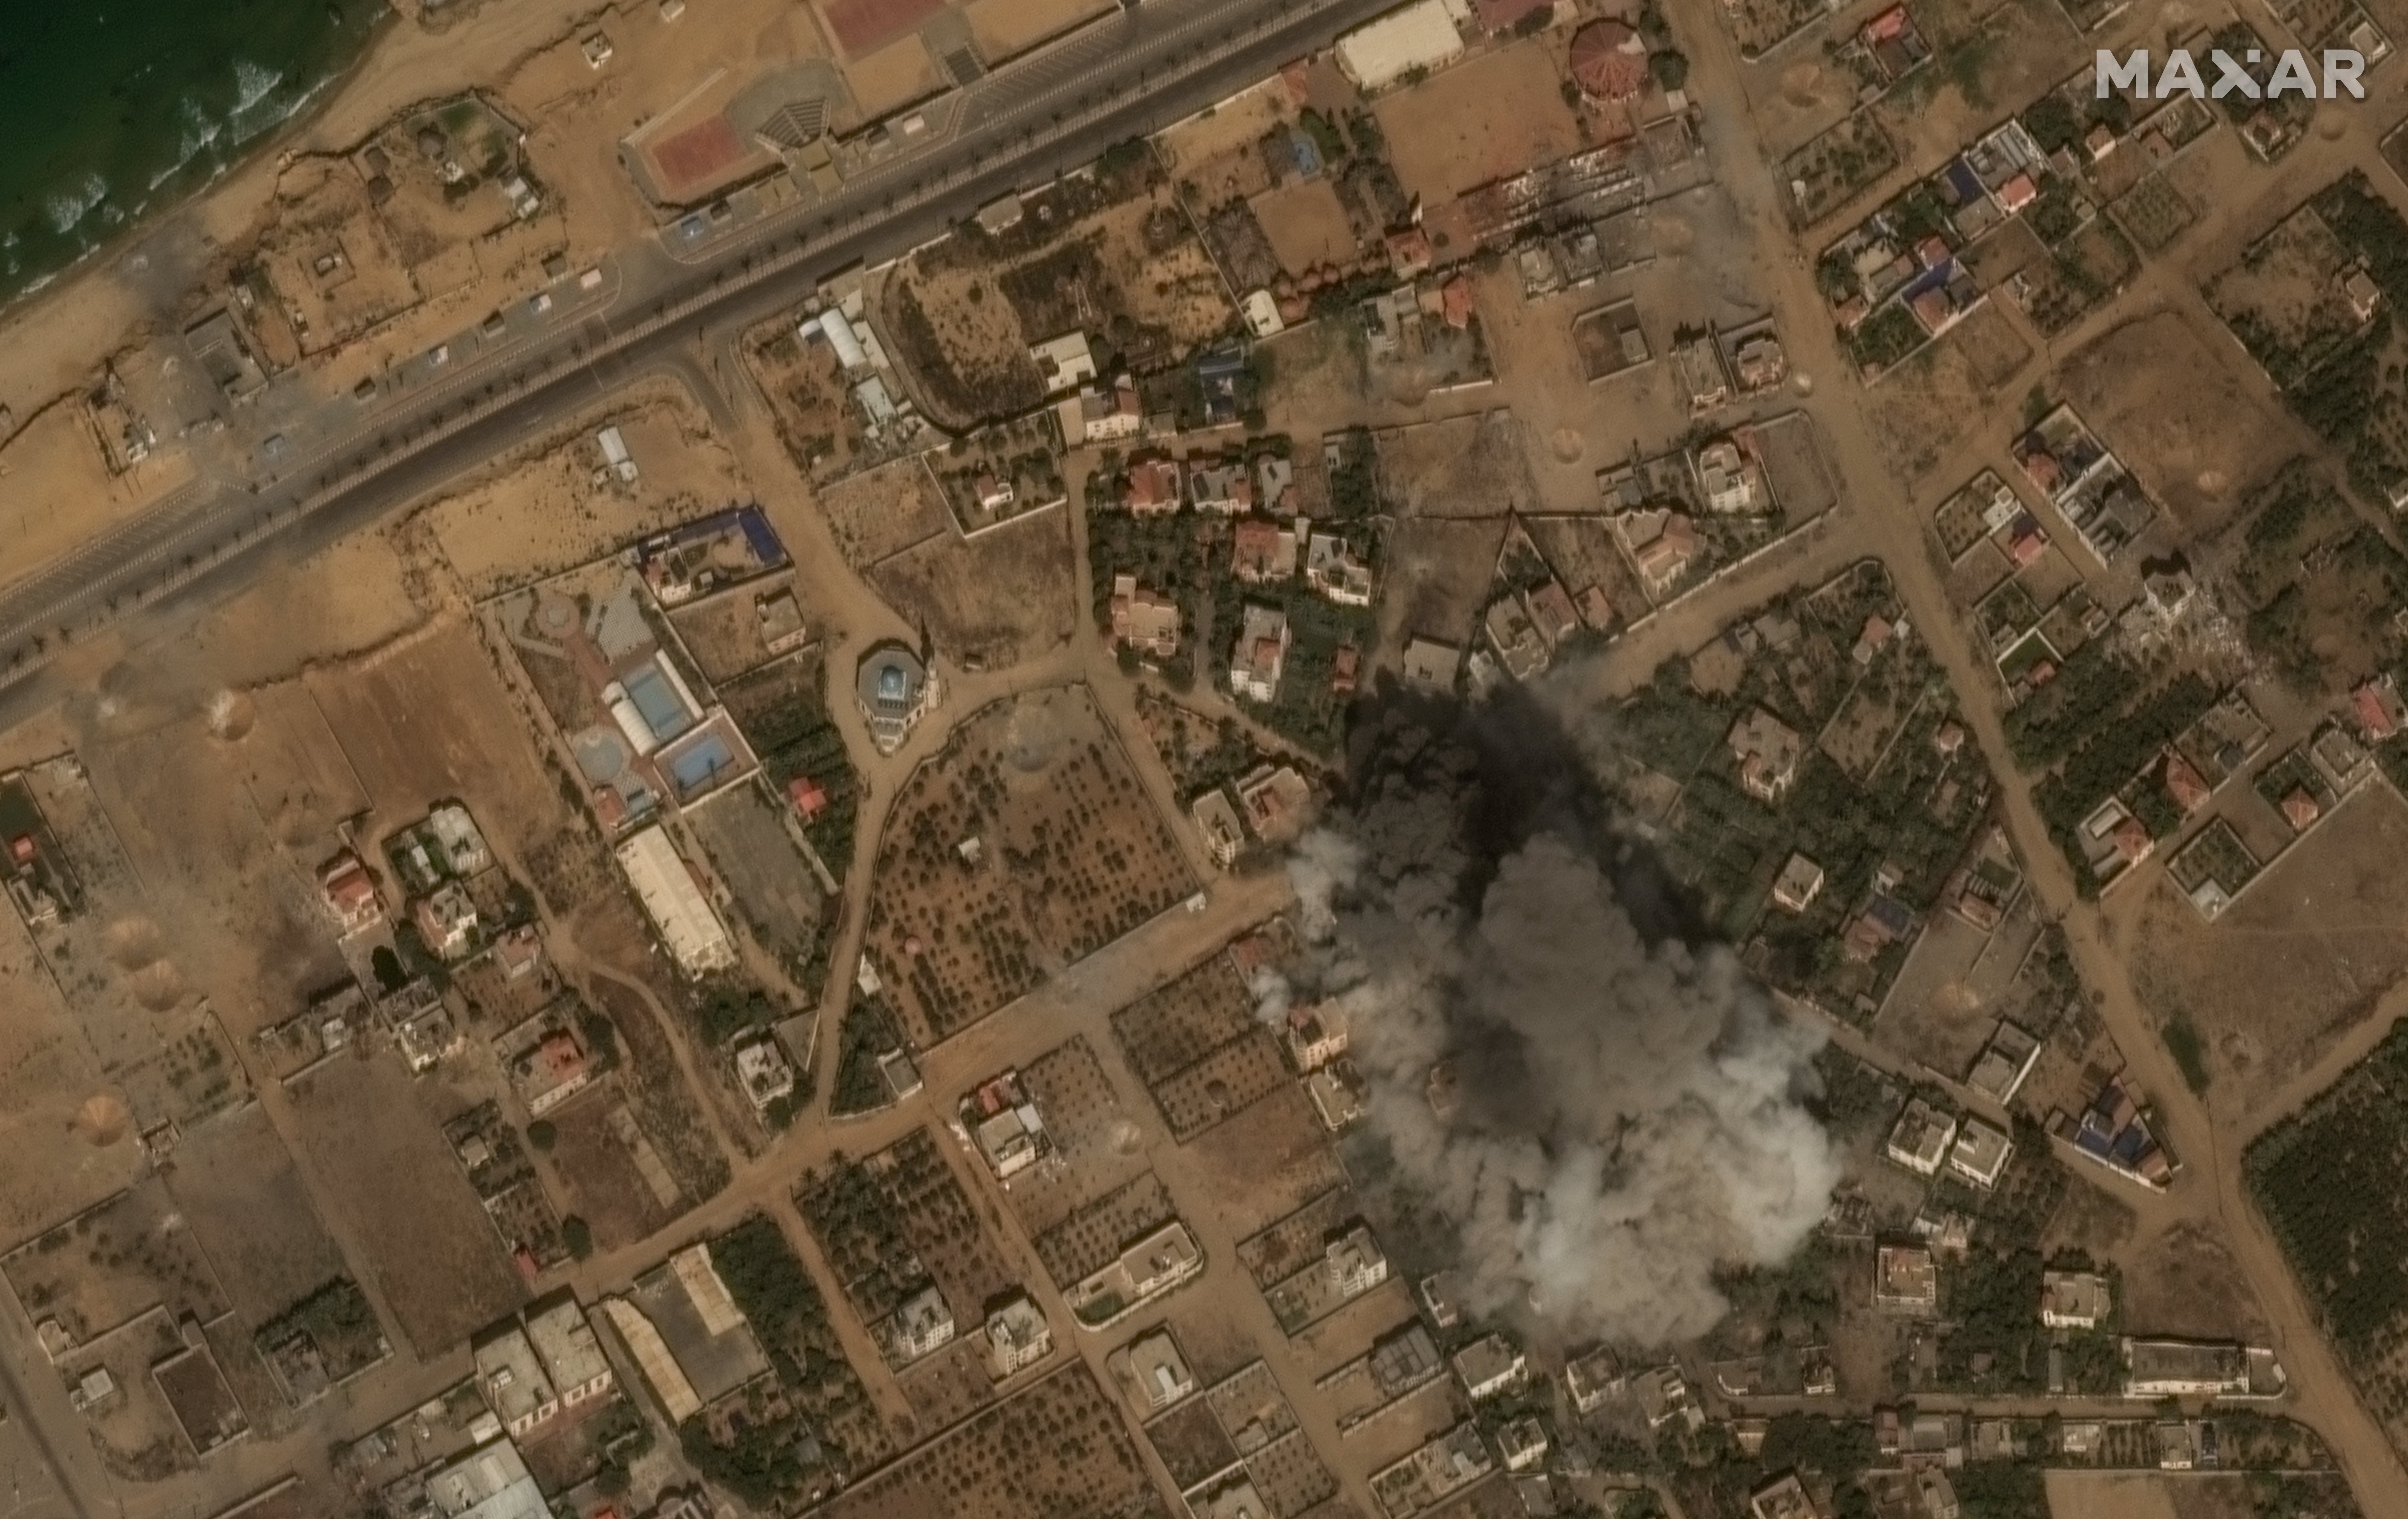 Aerial image shows an airstrike over the Gaza Strip